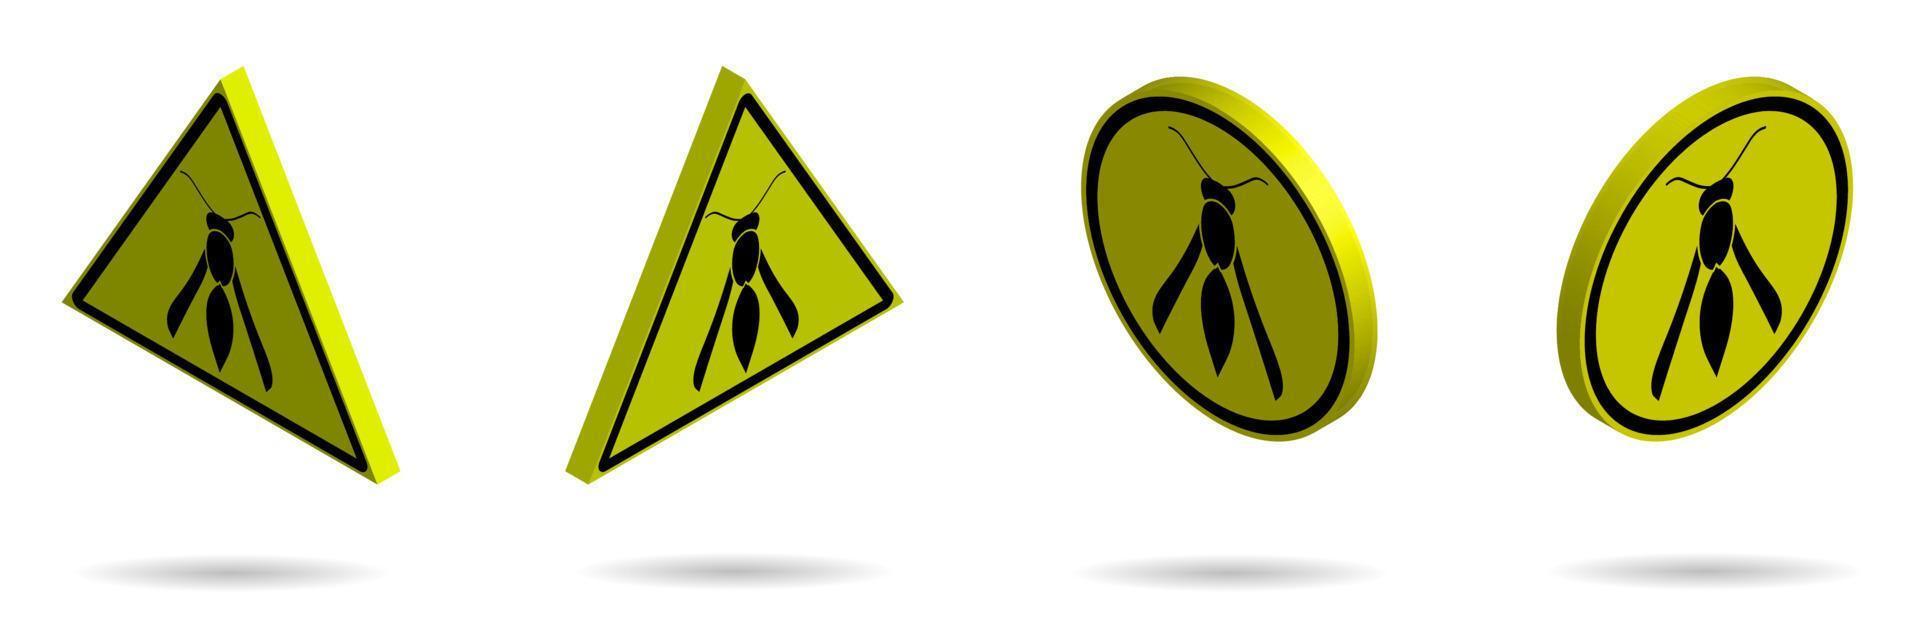 Set of isometric yellow black danger signs, attention. The attack of poisonous insects. Isolated vector